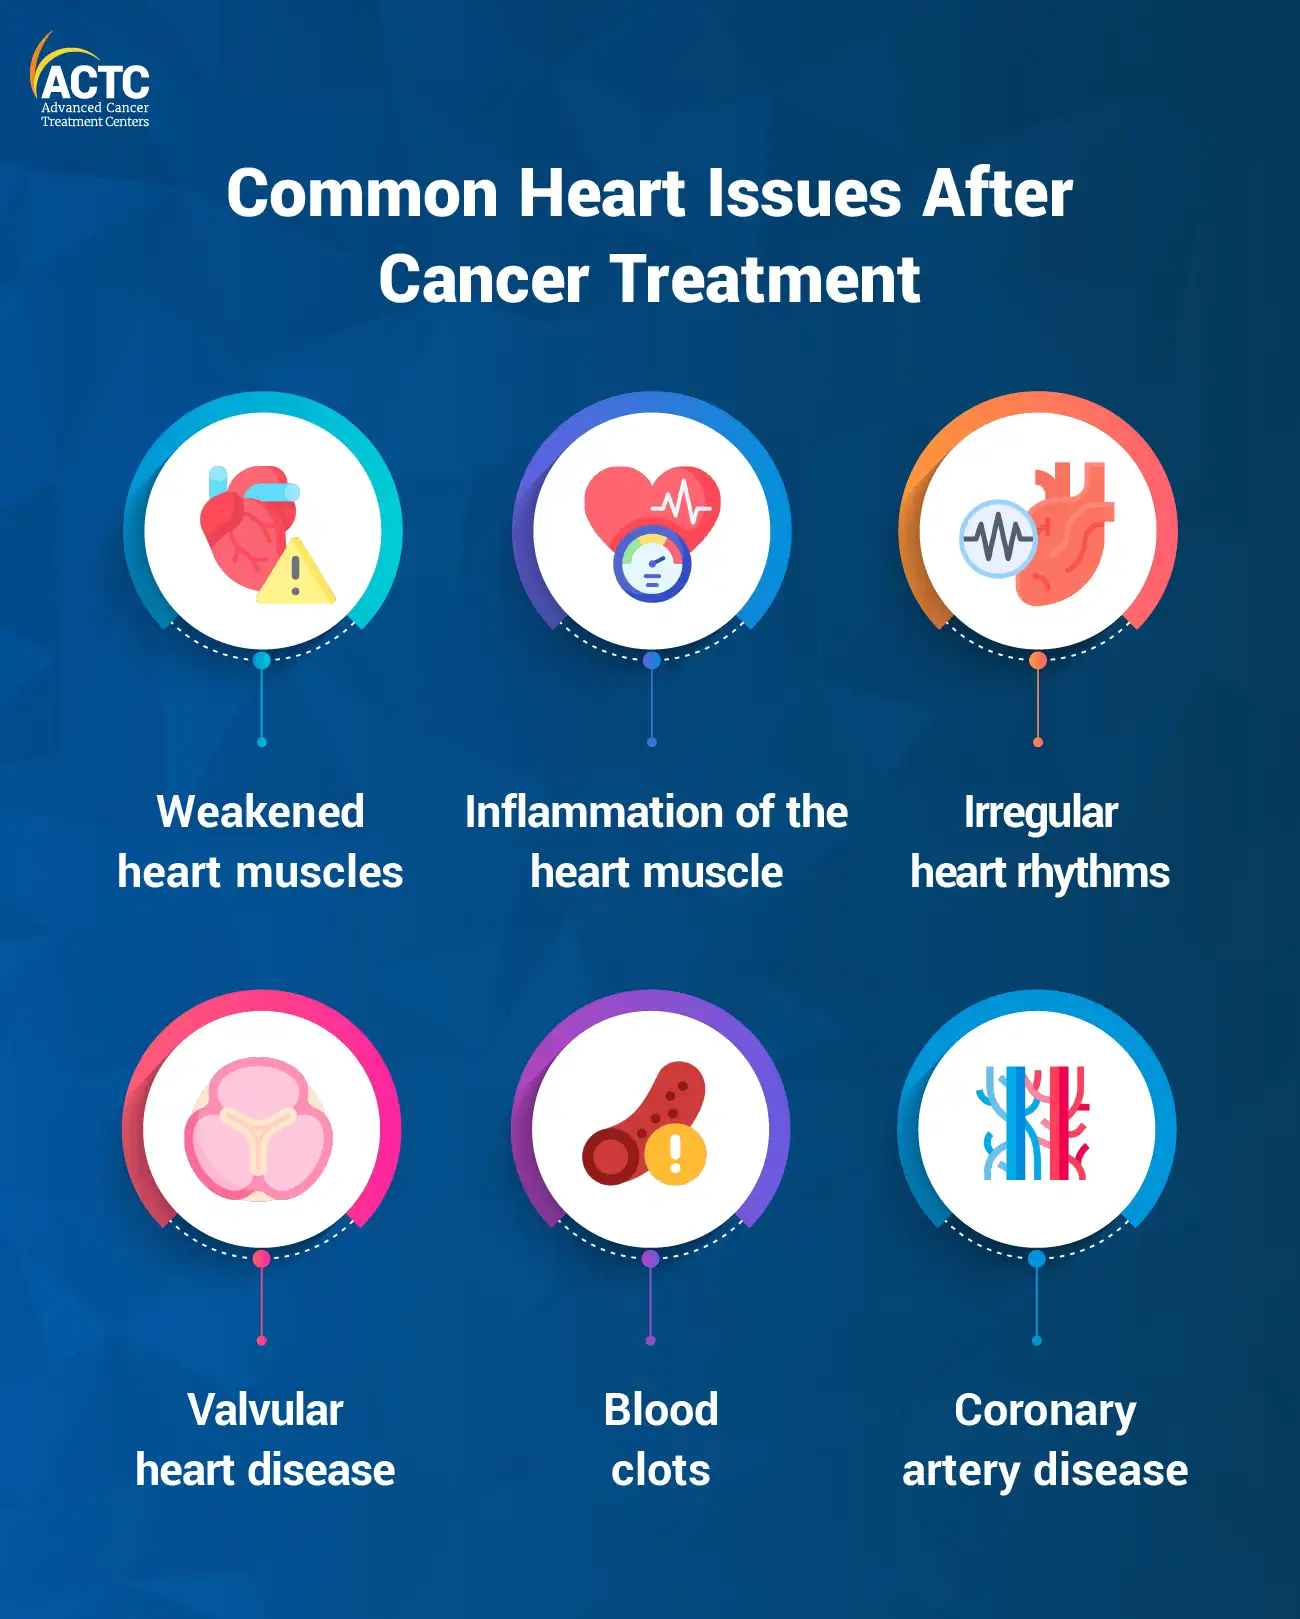 What Are the Possible Heart Issues Result from Cancer Treatment